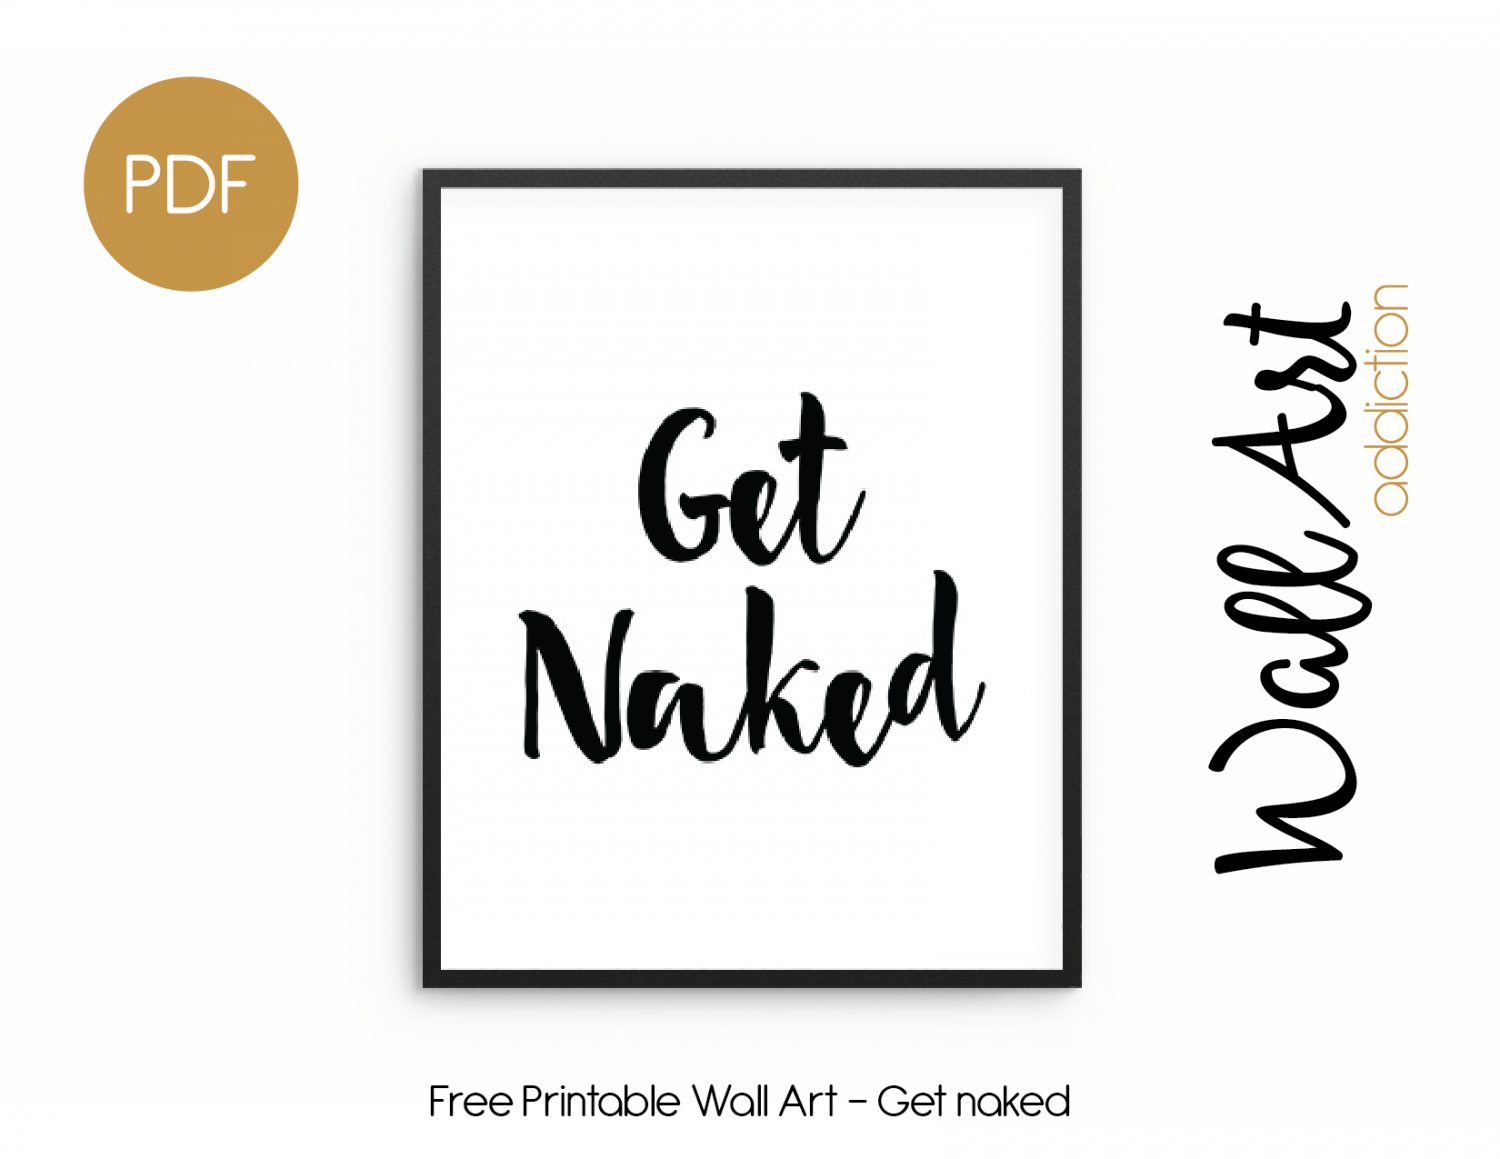 Free Printable Wall Art - Get Naked | For The Home In 2019 - Free Printable Wall Art